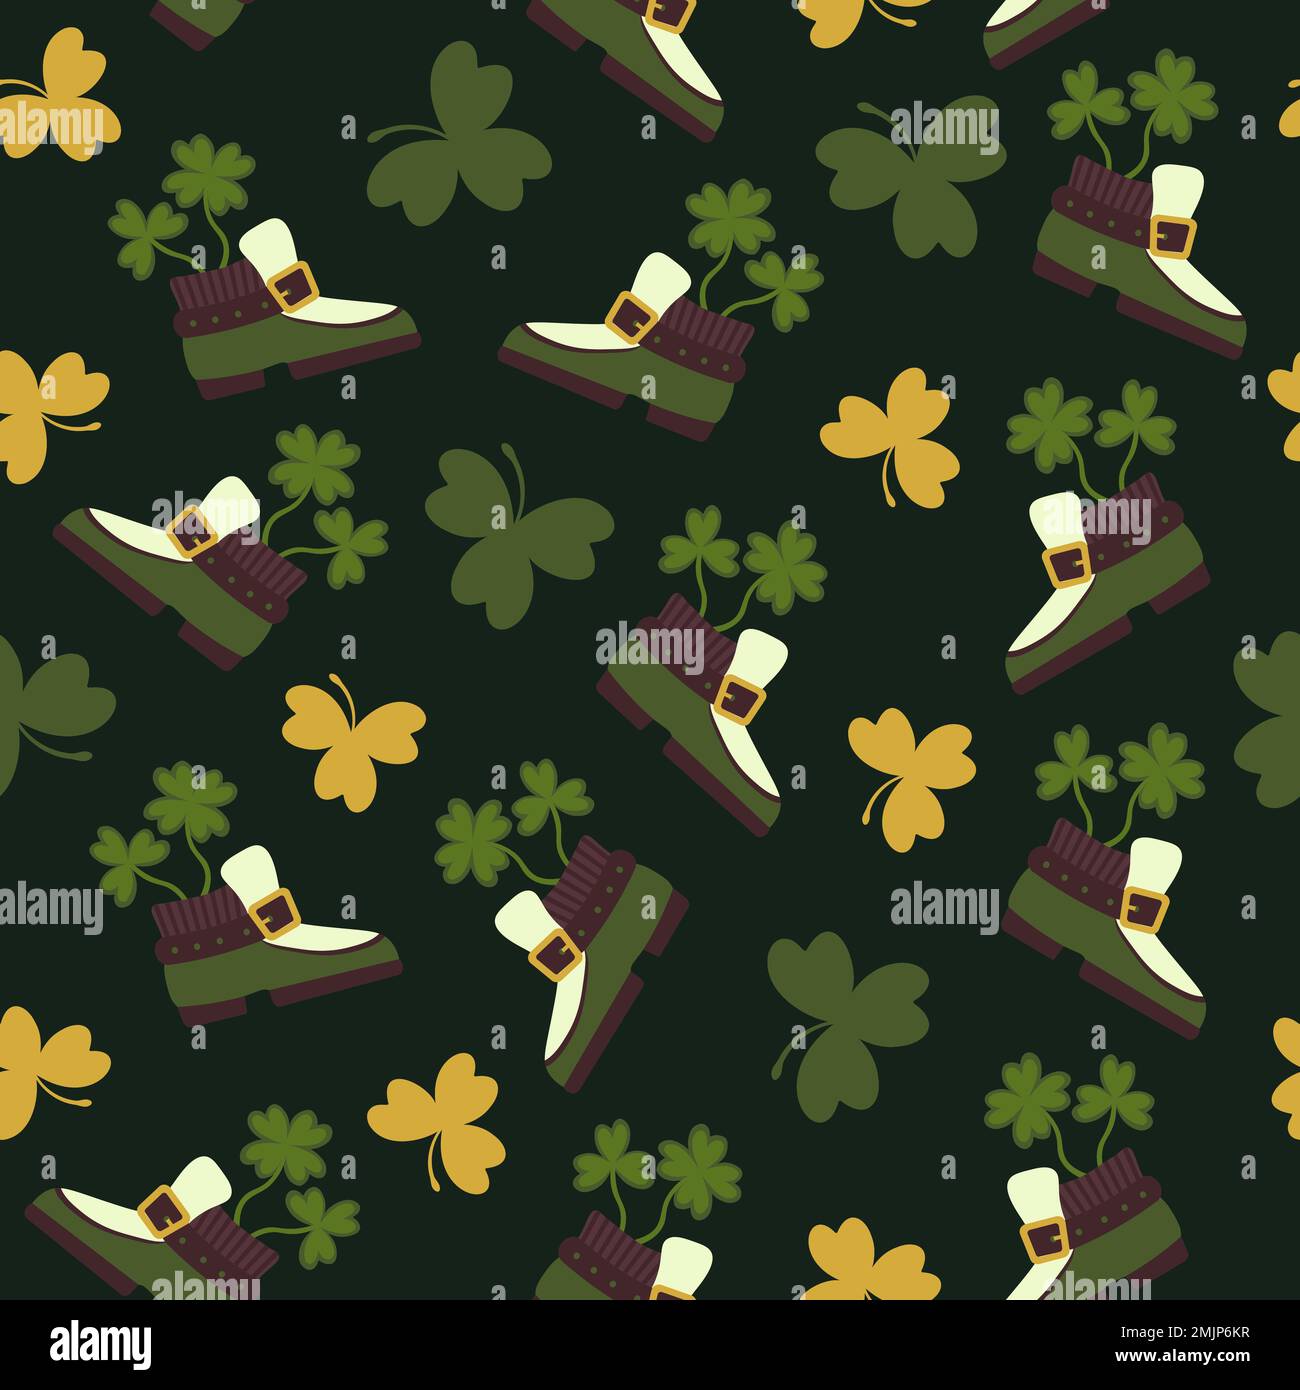 Decorative patterns with traditional elements set of st. patrick green boot clover Stock Vector